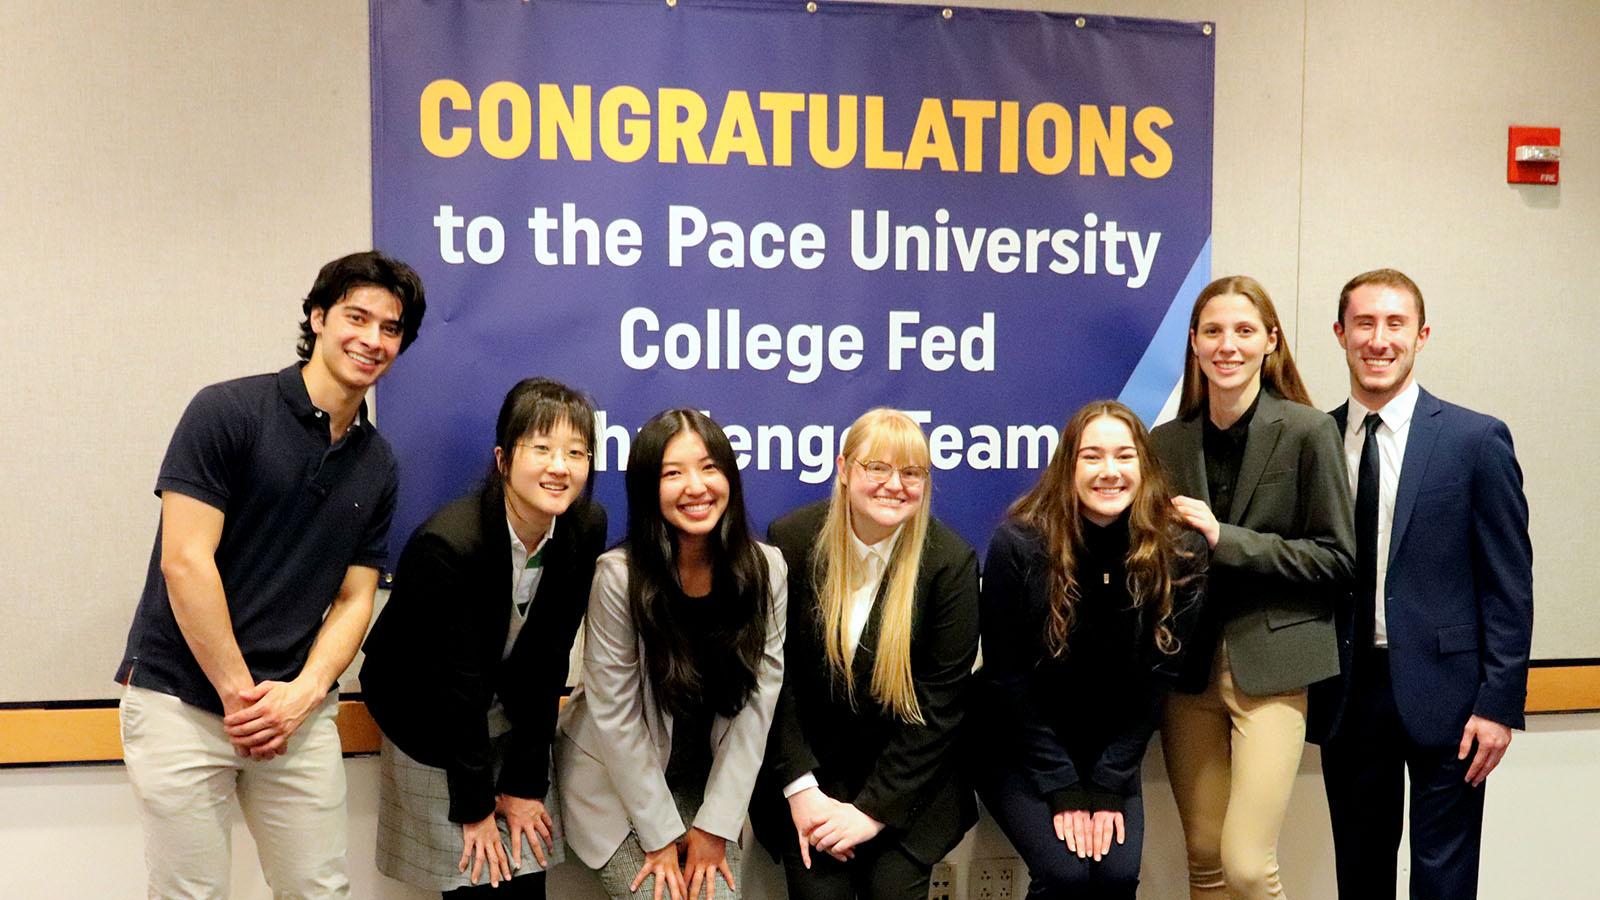 Federal Reserve Challenge 2022 Team in front of the Congratulations banner